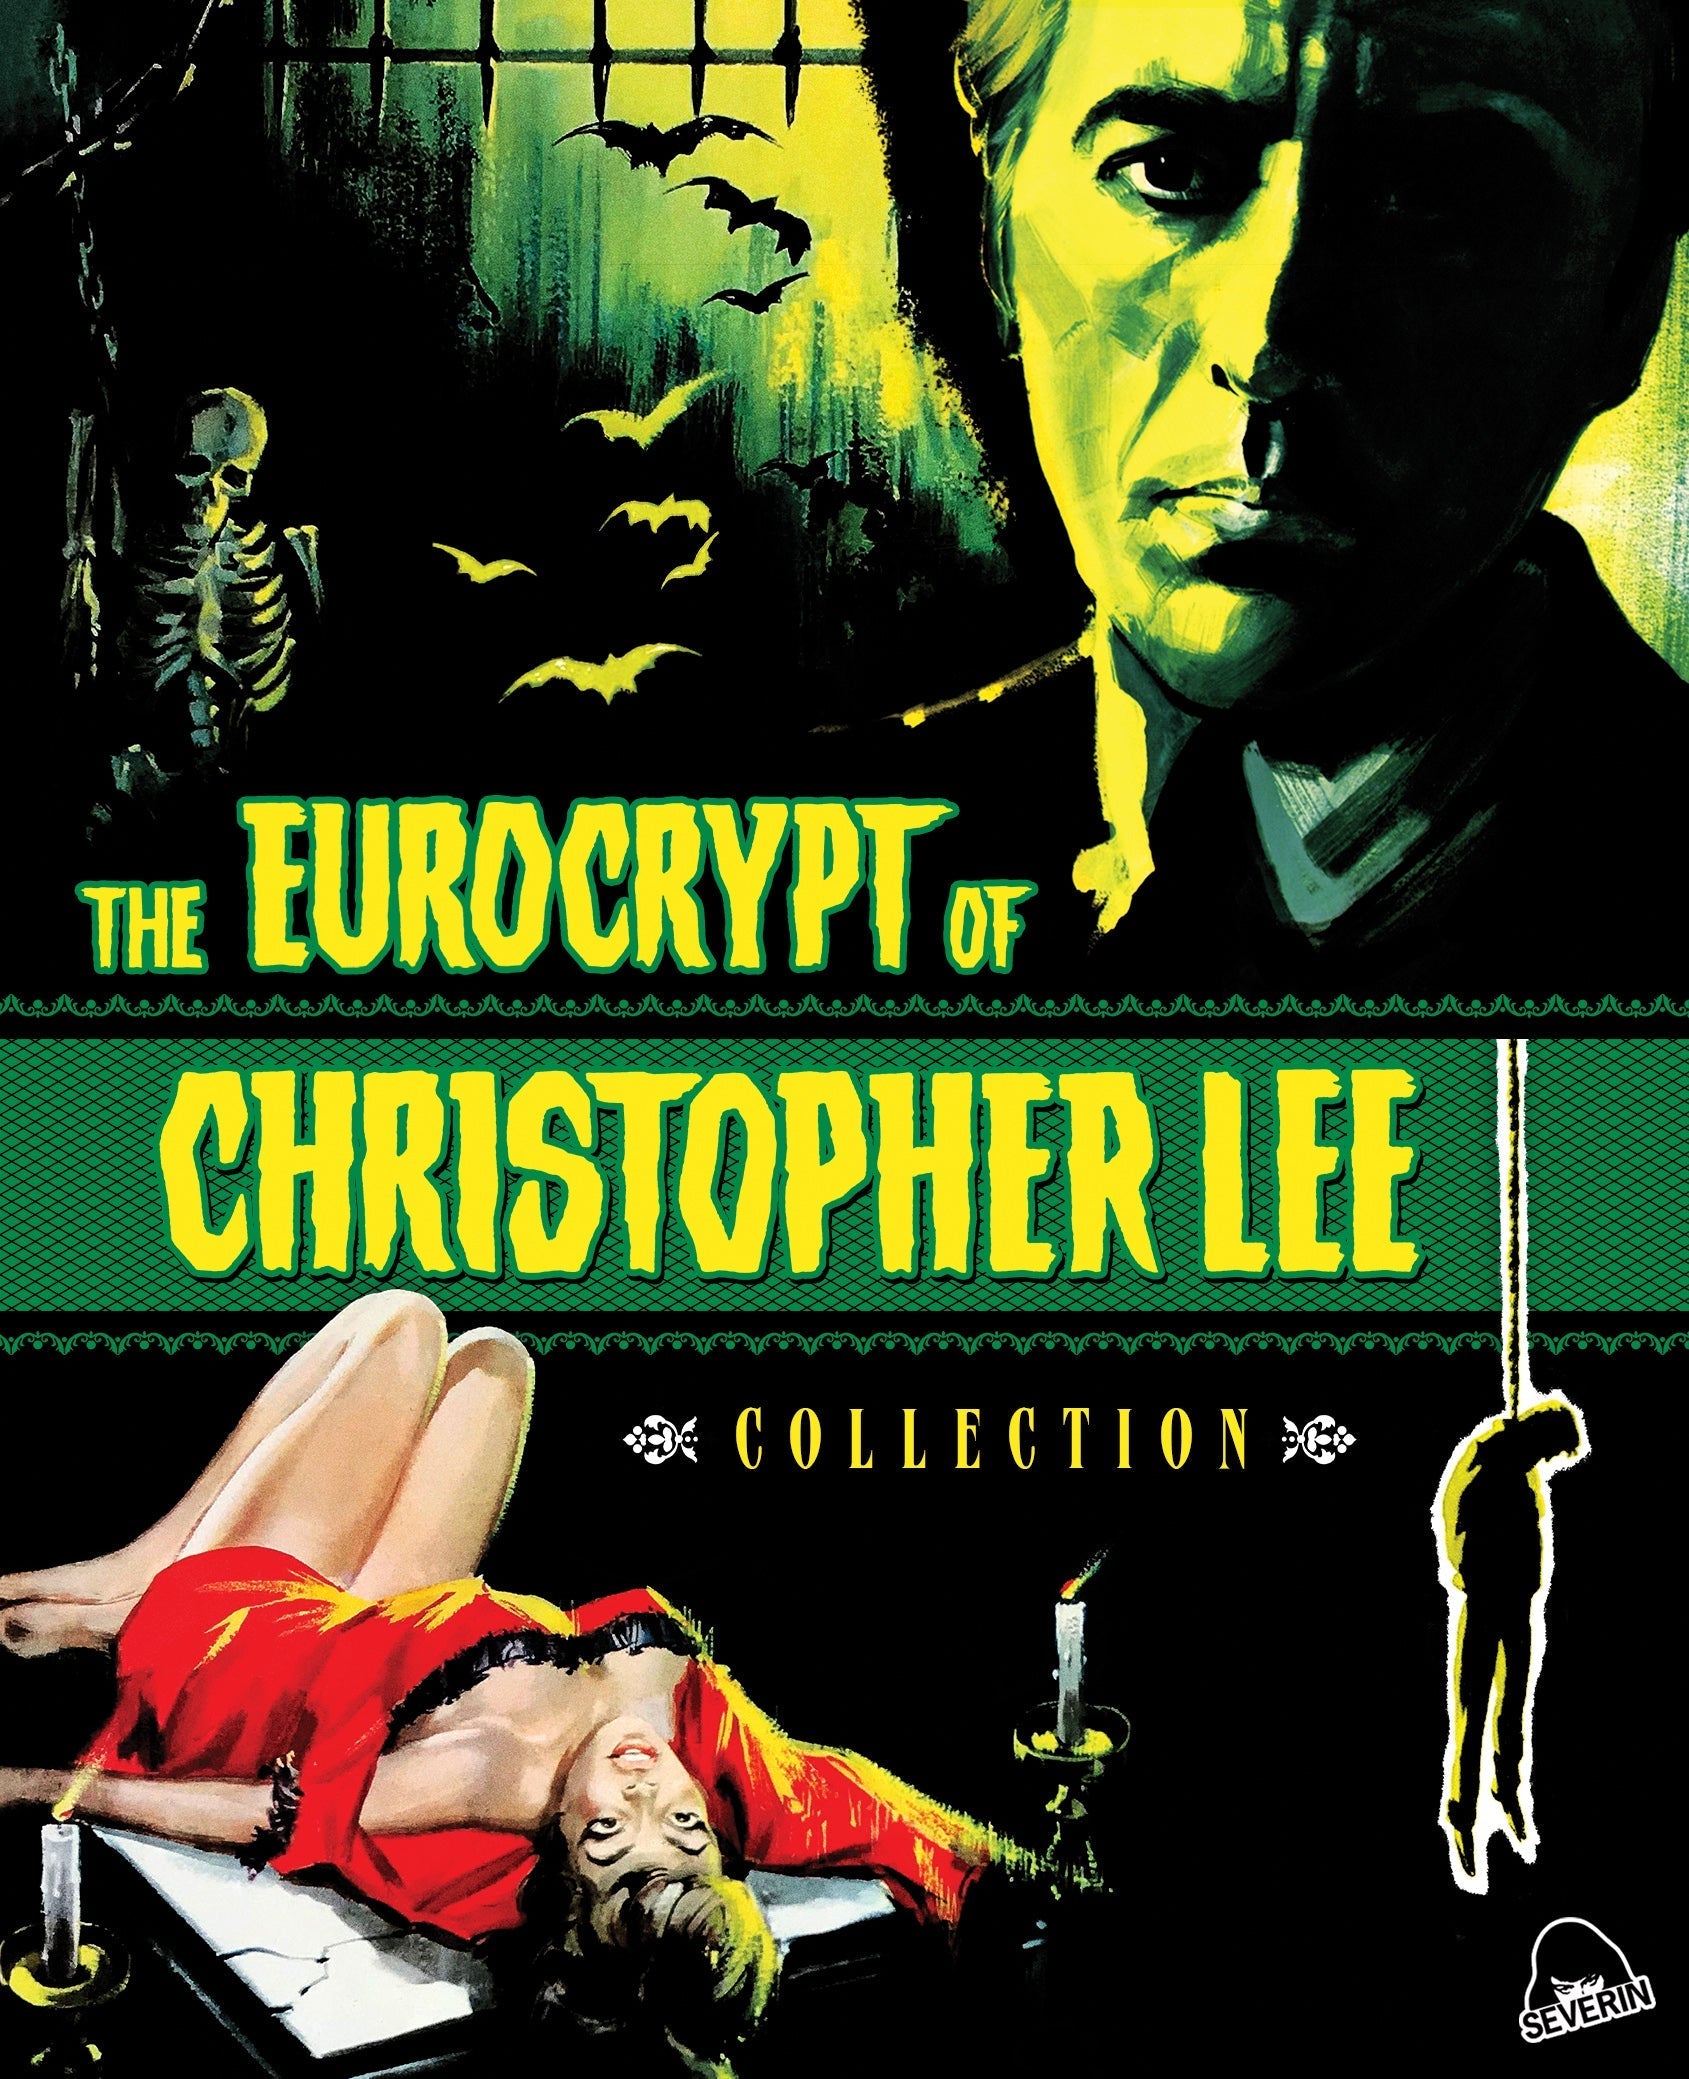 The Eurocrypt Of Christopher Lee Blu-Ray/cd Blu-Ray